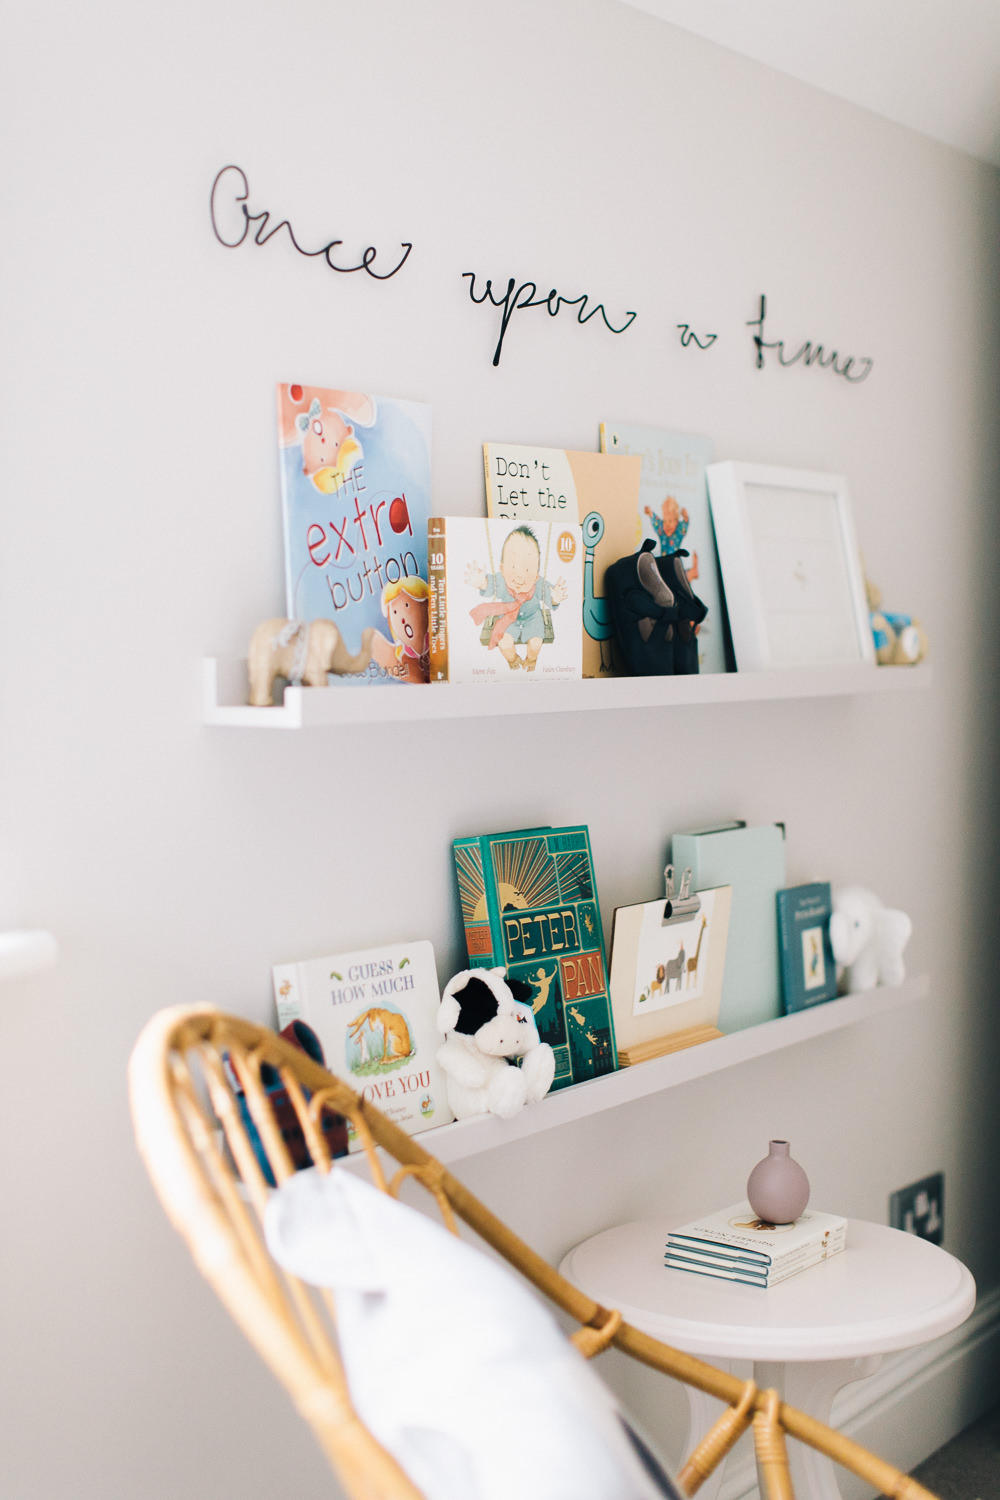 Ikea painted picture ledges with childrens books in a nursery with Once upon a tme sign